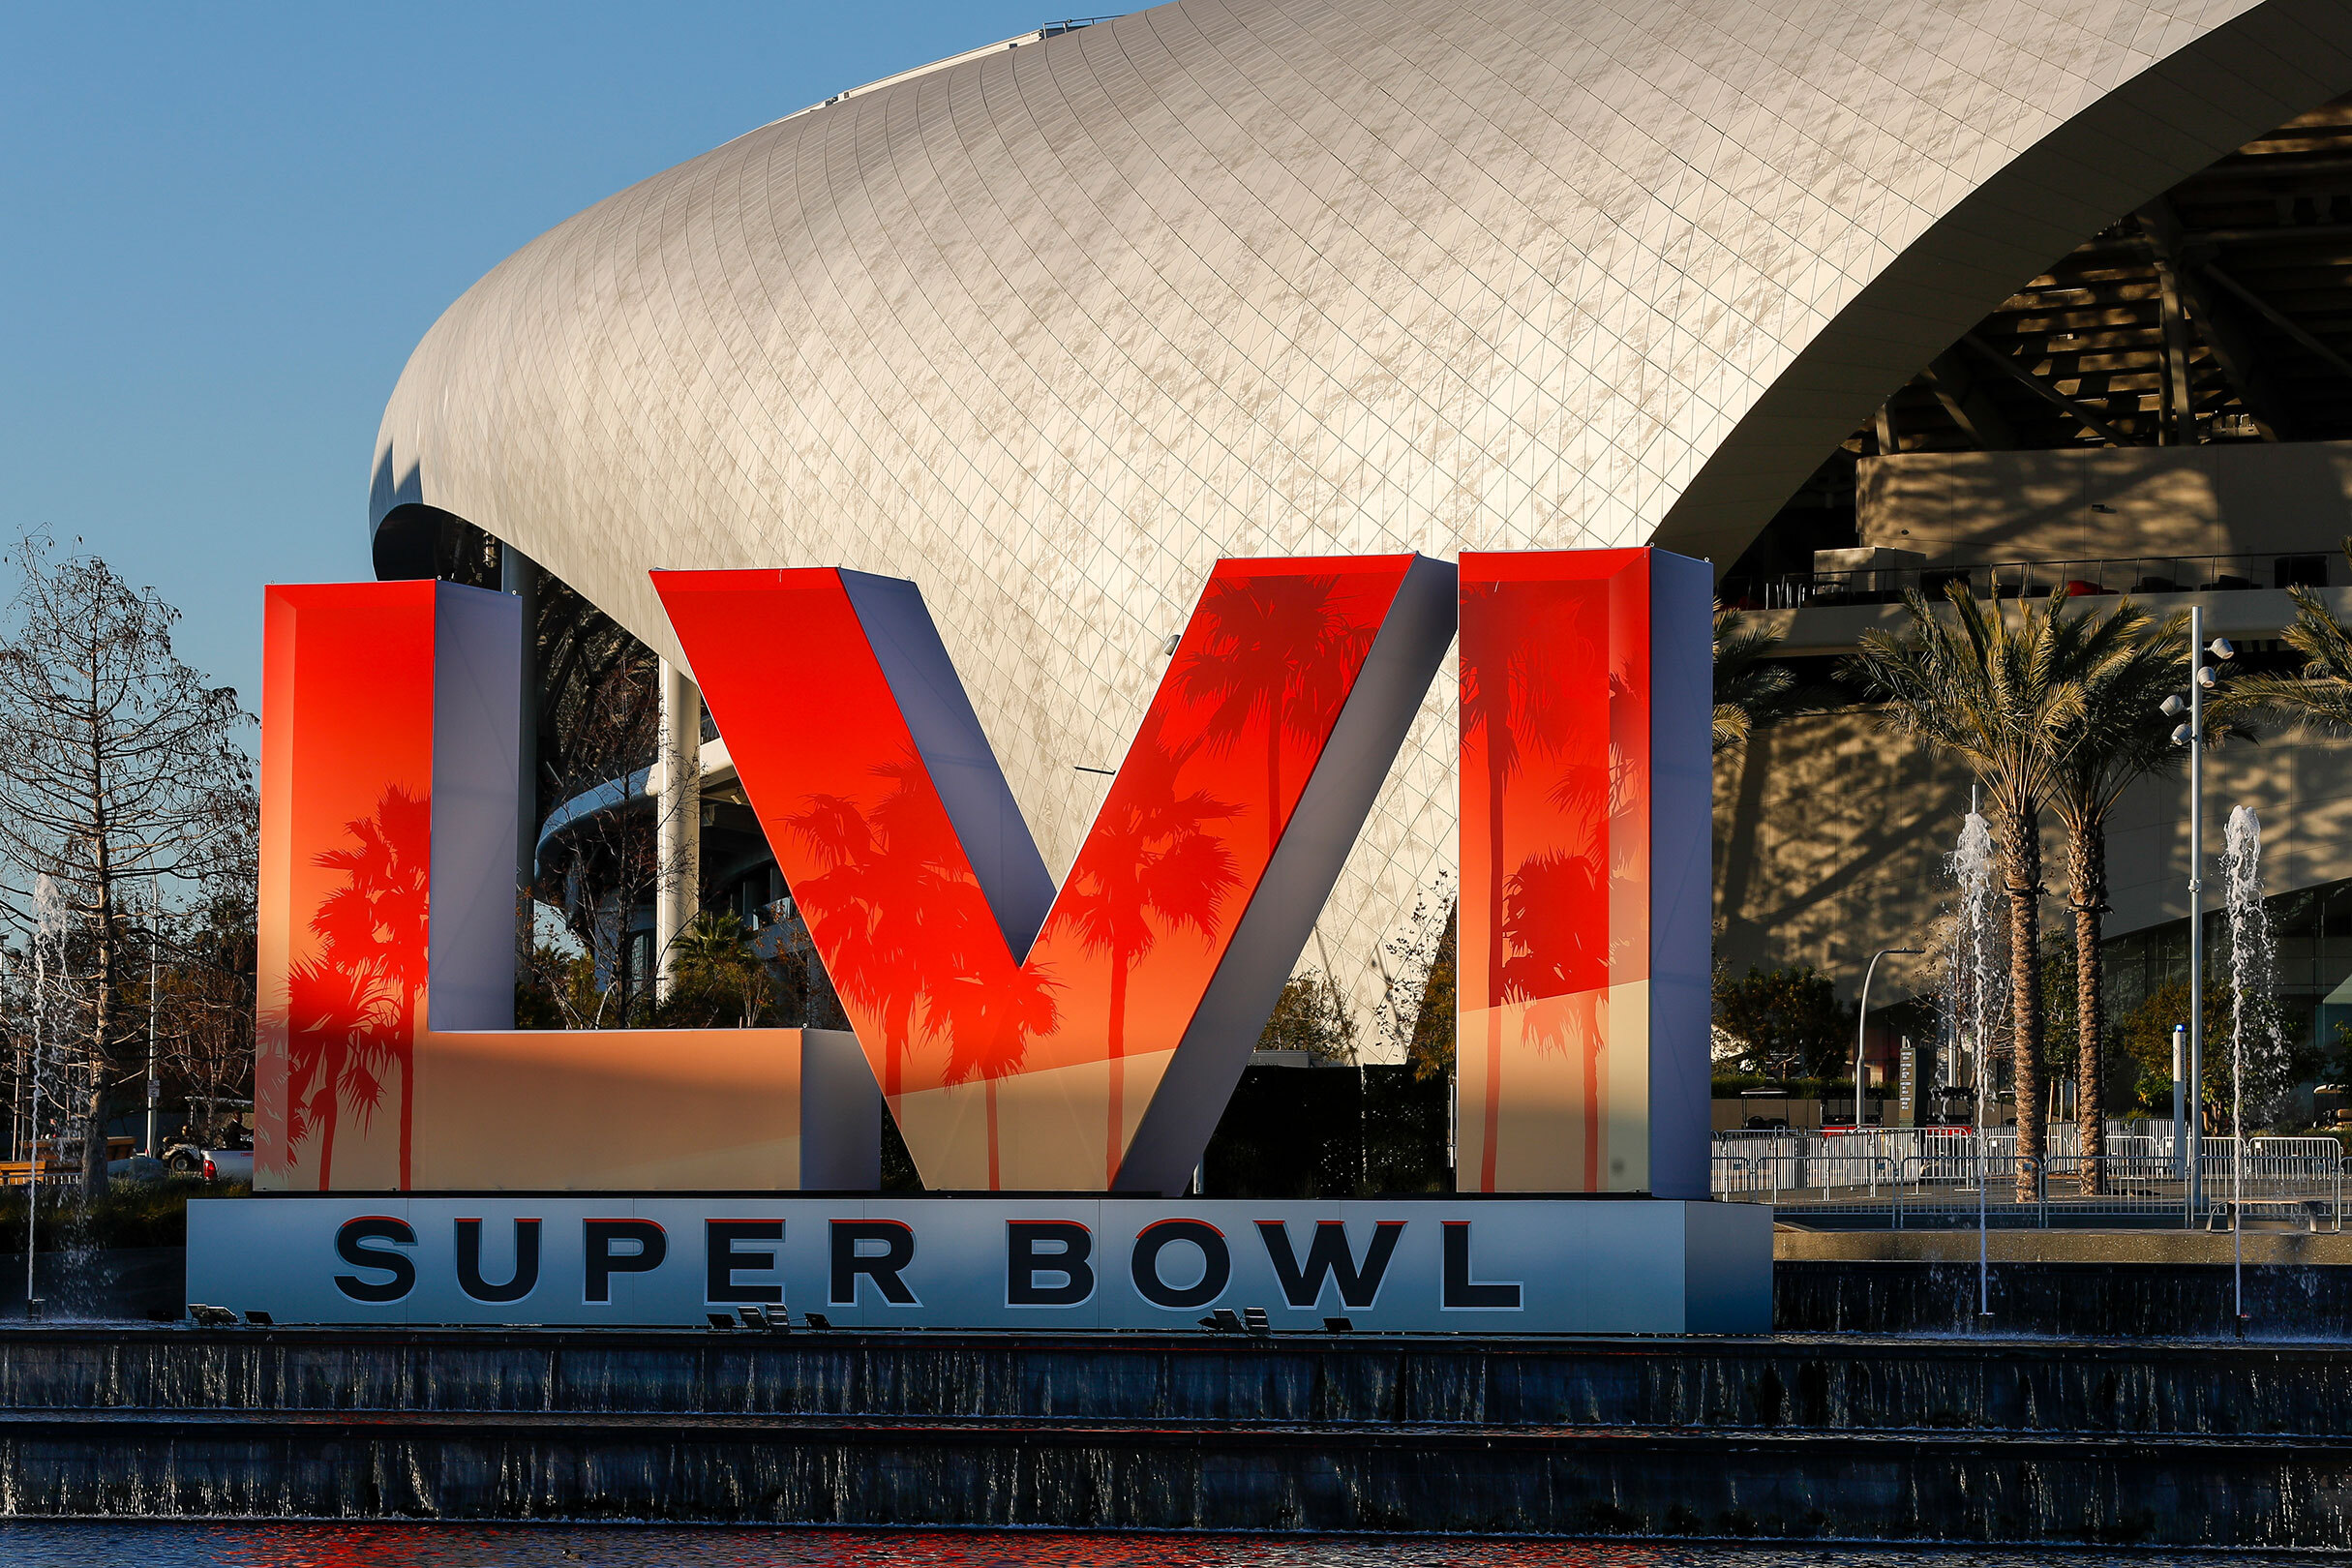 what channel is the super bowl on roku tv live